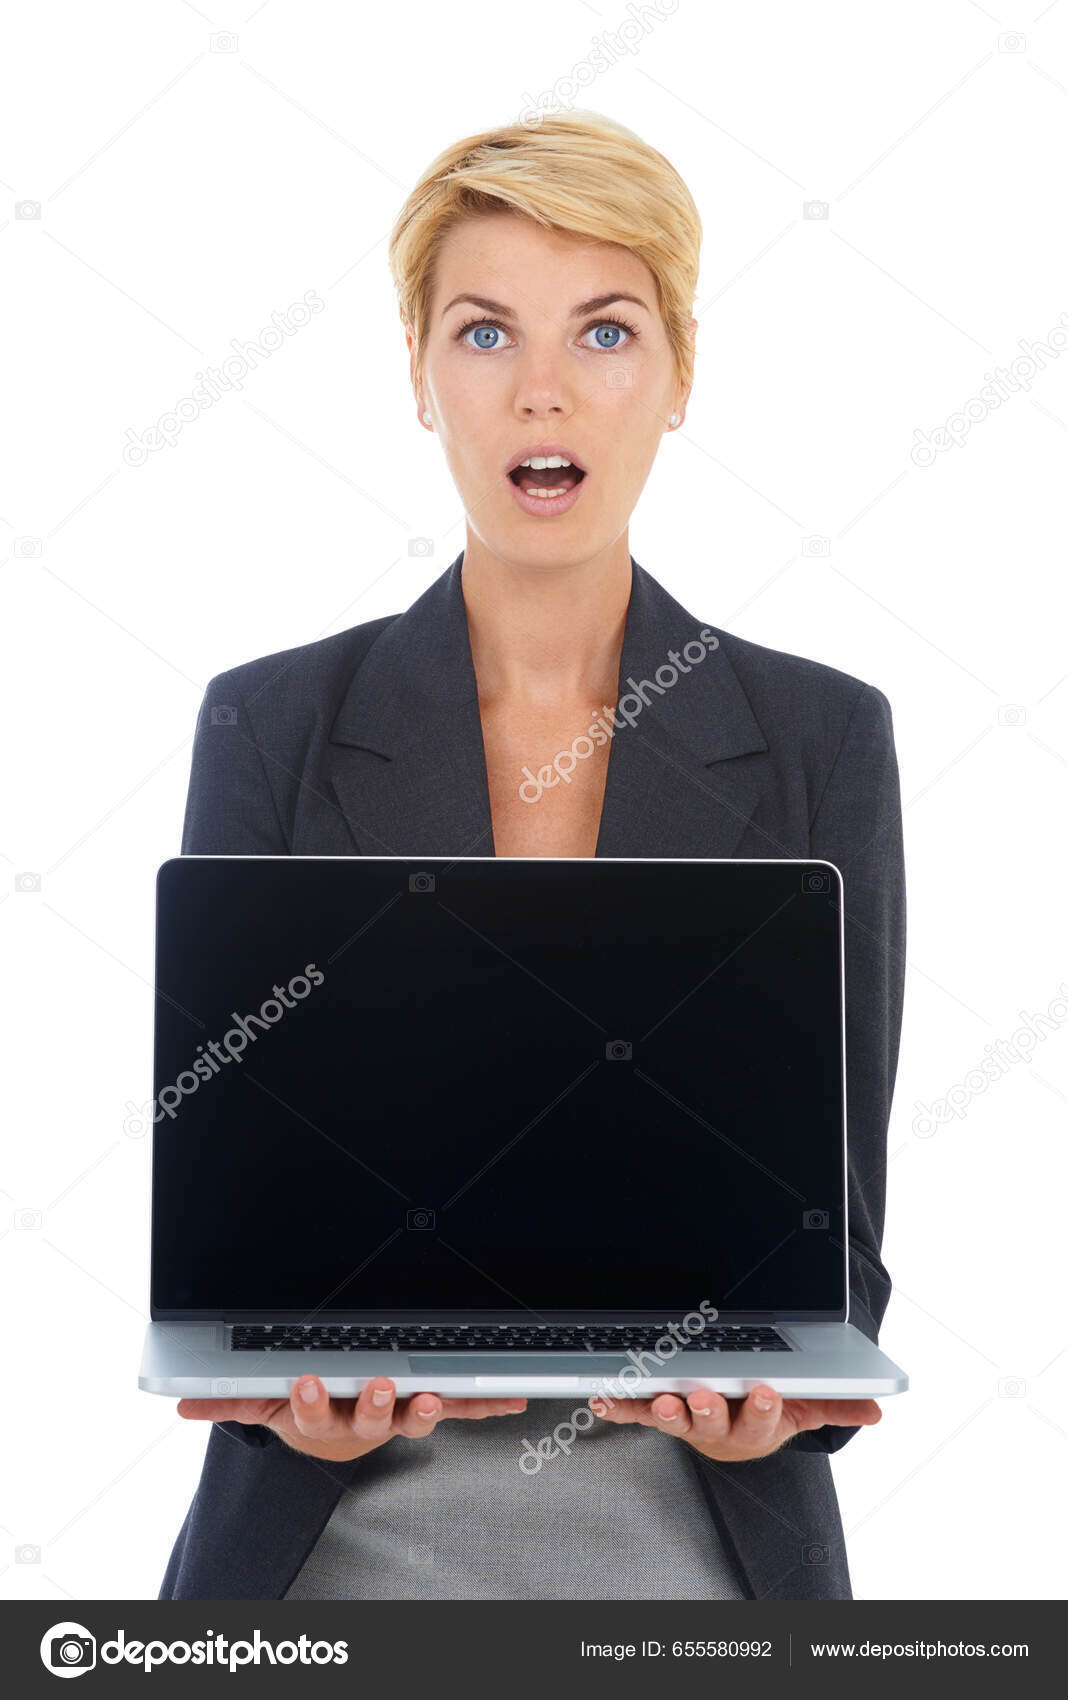 Features　Photo　Showing　Young　Laptop　Blank　Screen　Businesswoman　by　Laptops　Awe　Stock　You　655580992